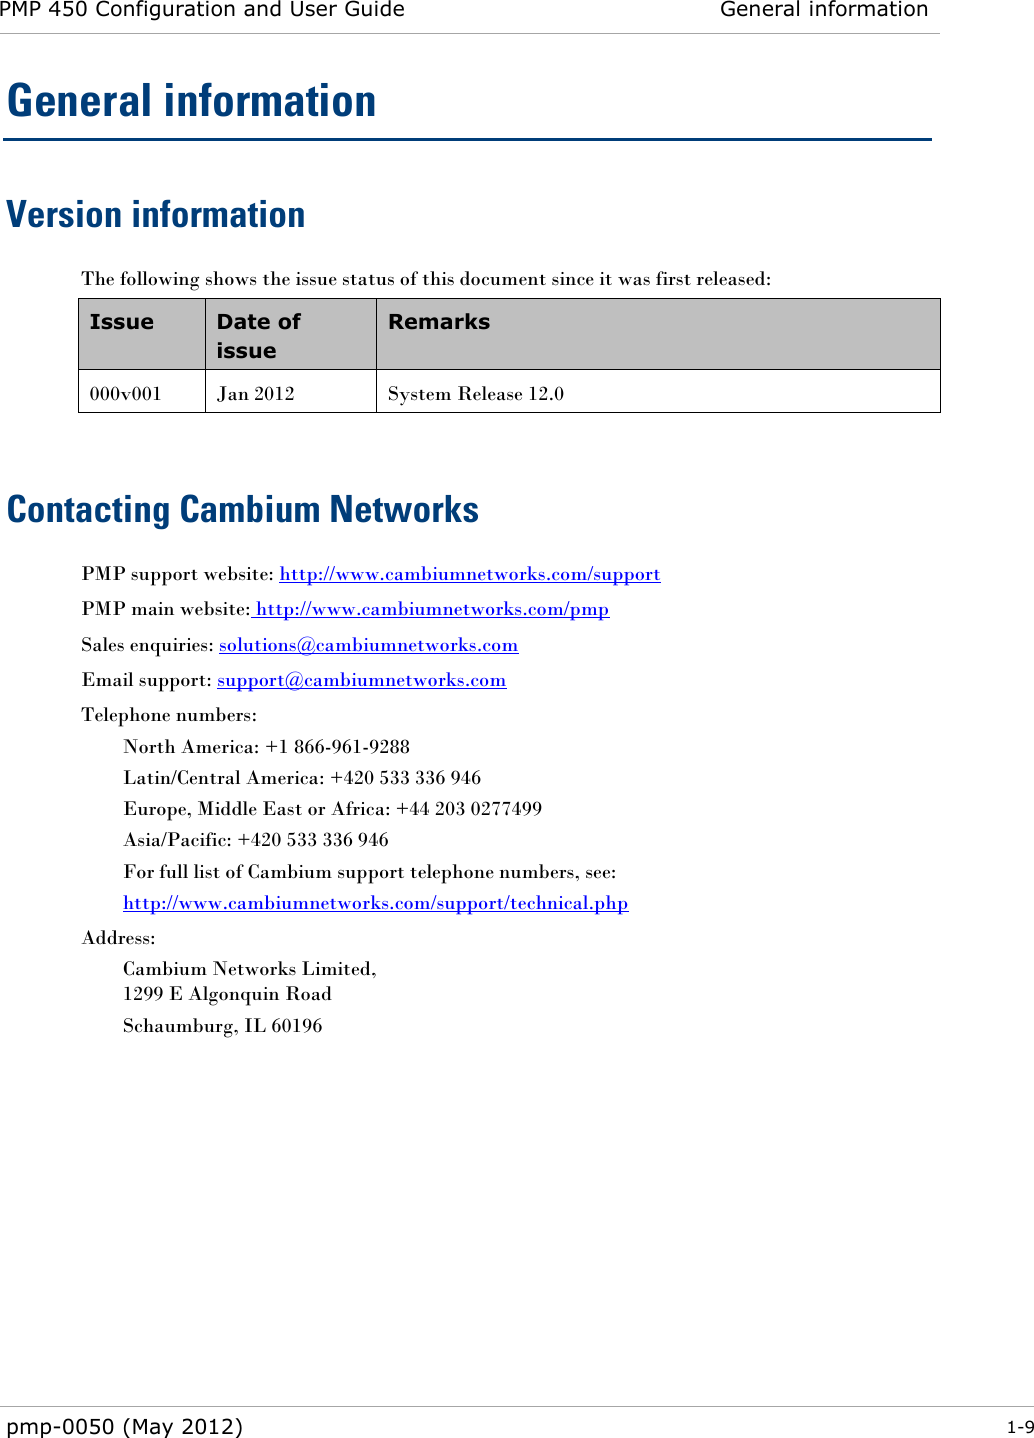 PMP 450 Configuration and User Guide General information  pmp-0050 (May 2012)  1-9  General information Version information The following shows the issue status of this document since it was first released: Issue Date of issue Remarks 000v001 Jan 2012 System Release 12.0  Contacting Cambium Networks PMP support website: http://www.cambiumnetworks.com/support PMP main website: http://www.cambiumnetworks.com/pmp Sales enquiries: solutions@cambiumnetworks.com Email support: support@cambiumnetworks.com Telephone numbers: North America: +1 866-961-9288 Latin/Central America: +420 533 336 946 Europe, Middle East or Africa: +44 203 0277499 Asia/Pacific: +420 533 336 946 For full list of Cambium support telephone numbers, see: http://www.cambiumnetworks.com/support/technical.php Address: Cambium Networks Limited, 1299 E Algonquin Road Schaumburg, IL 60196  